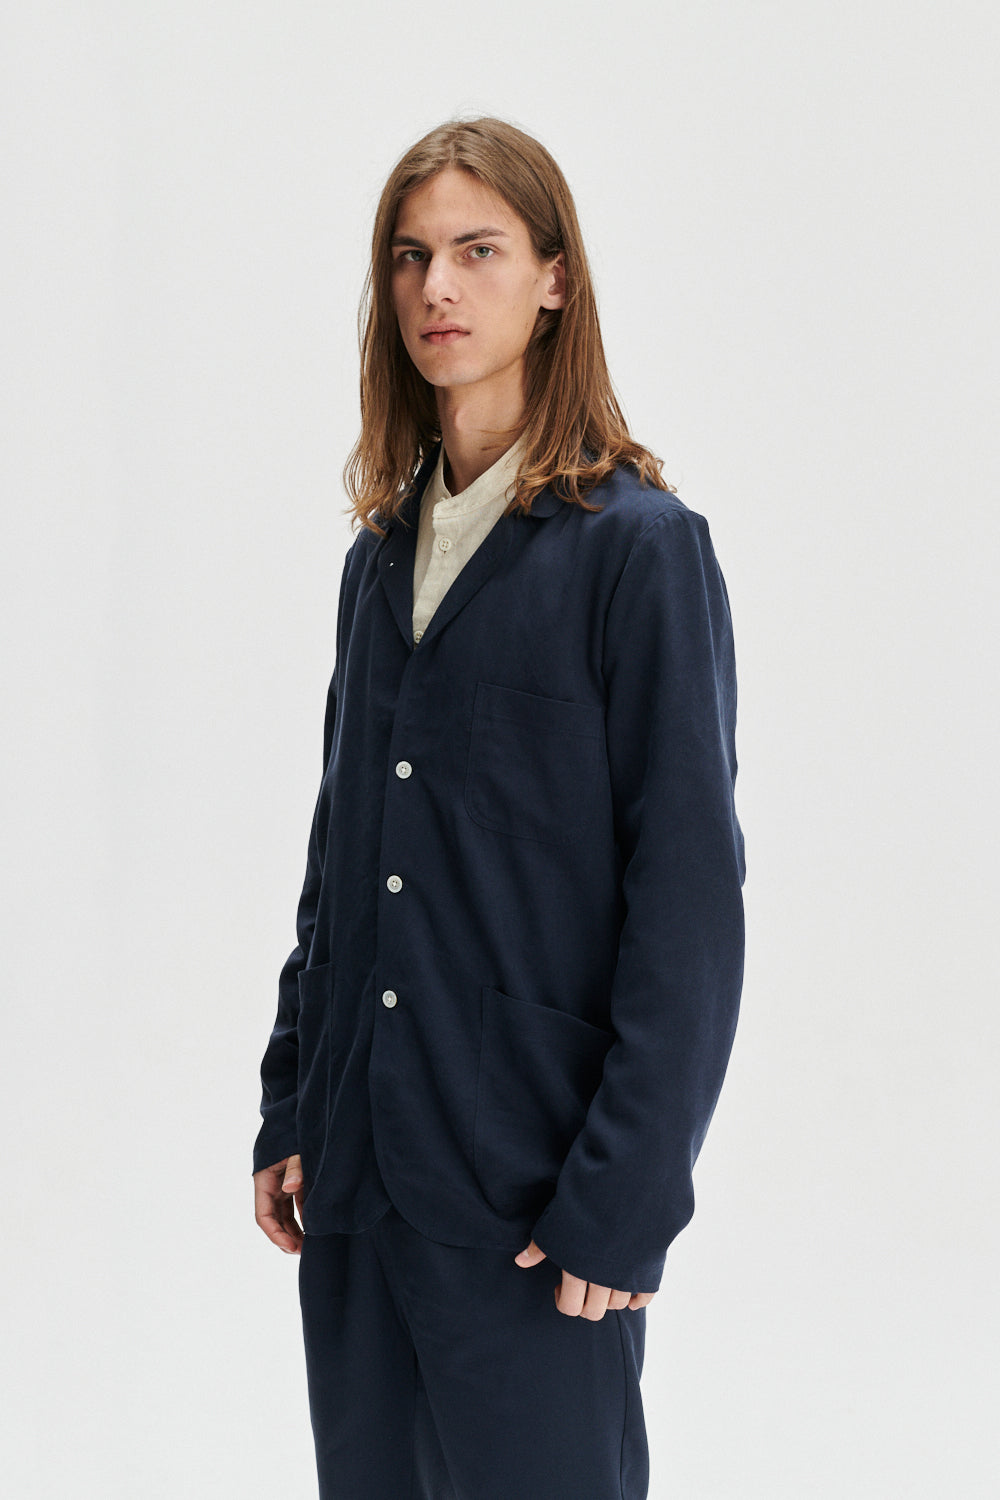 Versatile Sporting Jacket and Overshirt in a Navy Blue Fine Italian Lyocell